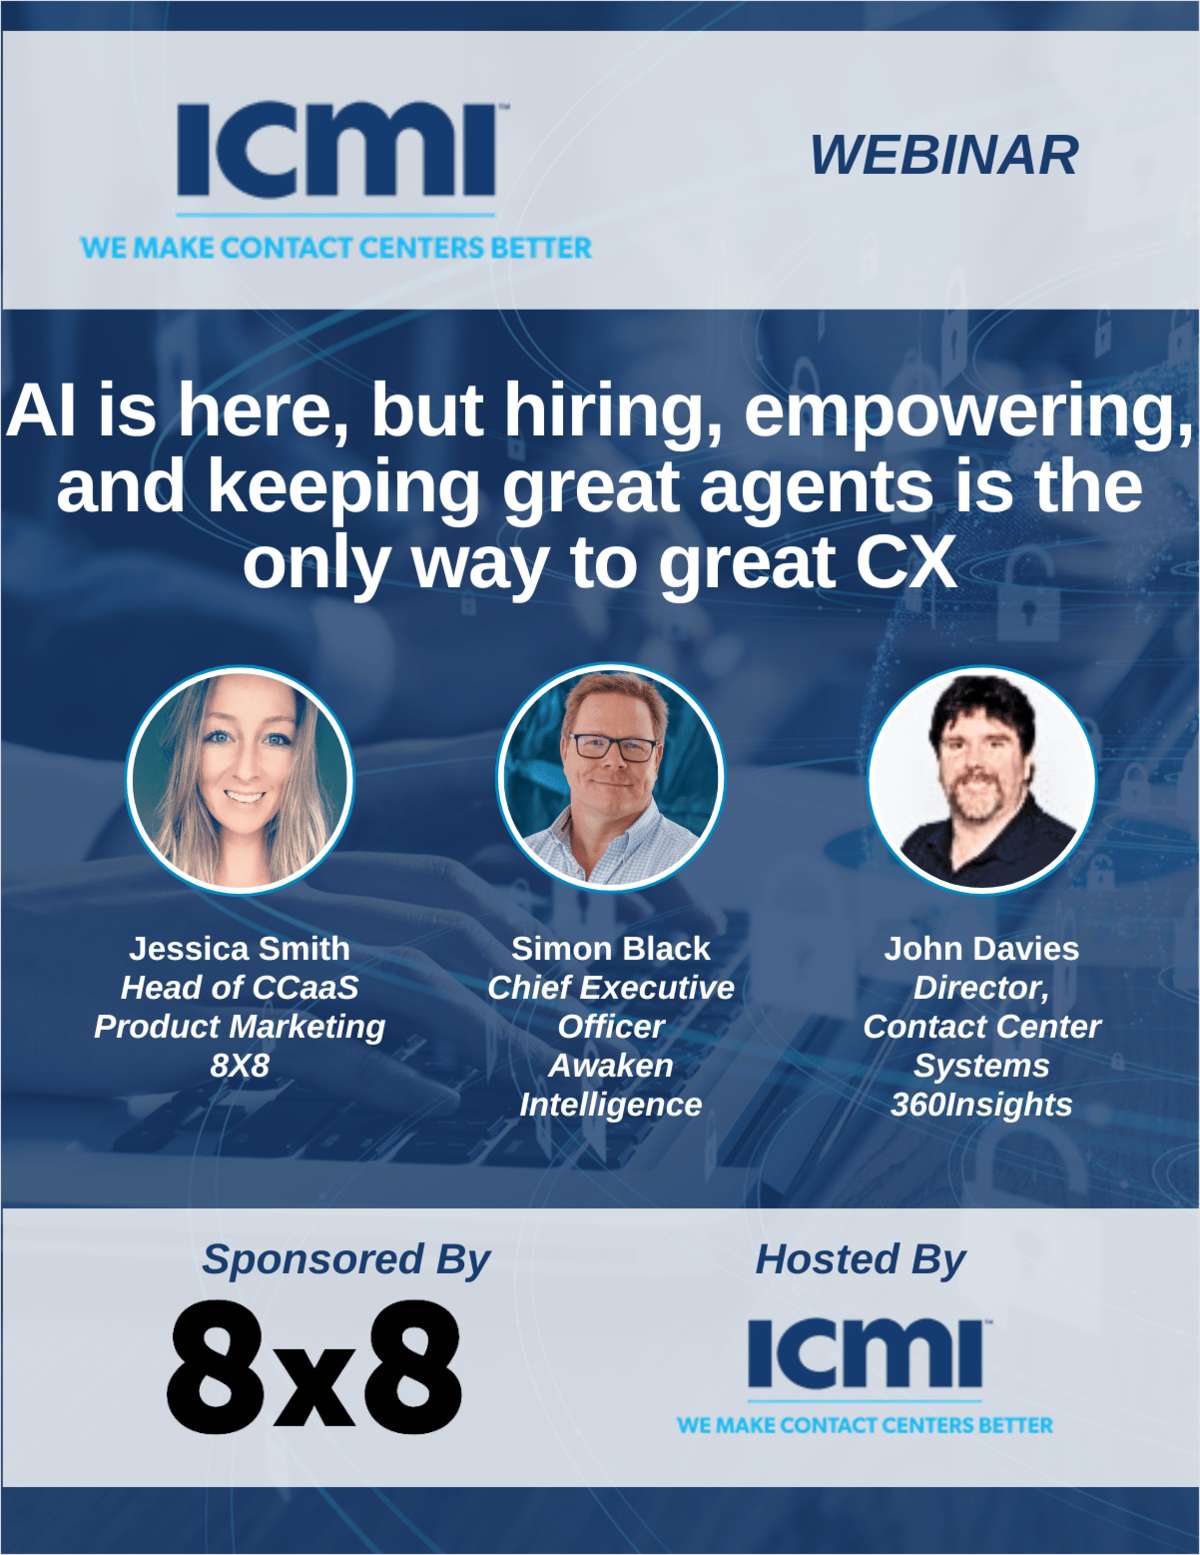 AI is here, but hiring, empowering, and keeping great agents is the only way to great CX